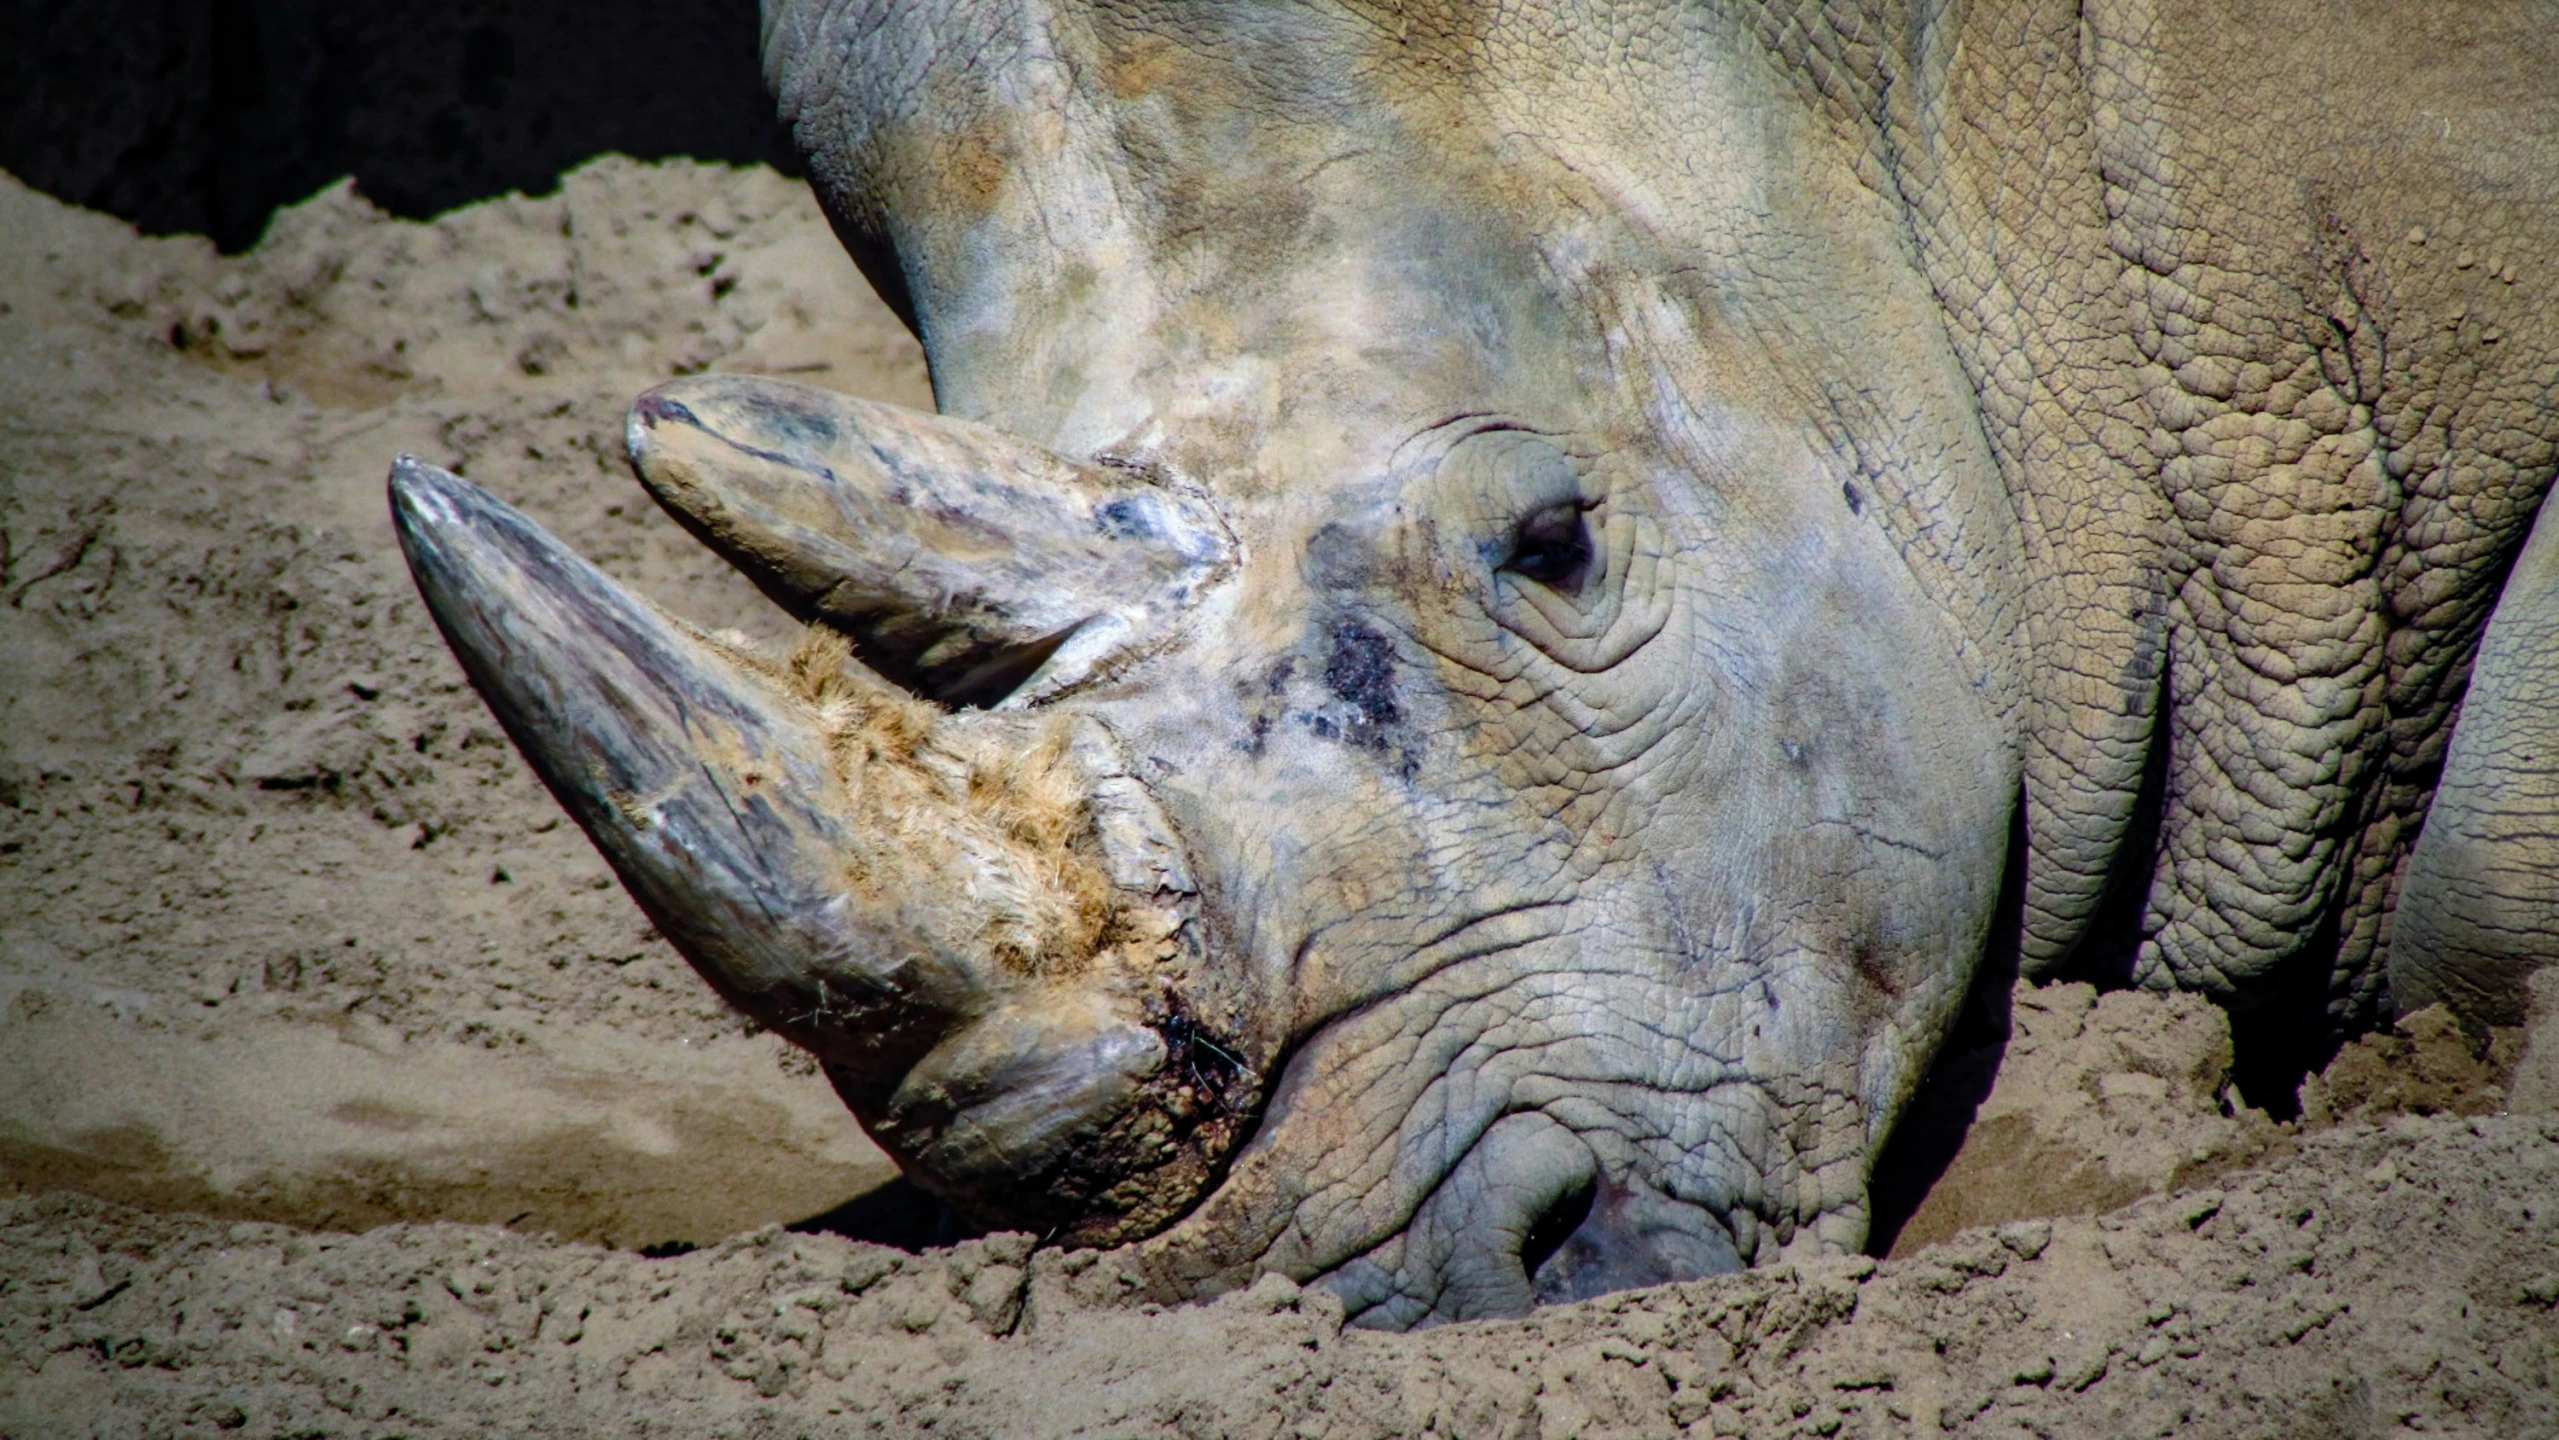 there is a rhino face lying down in the dirt